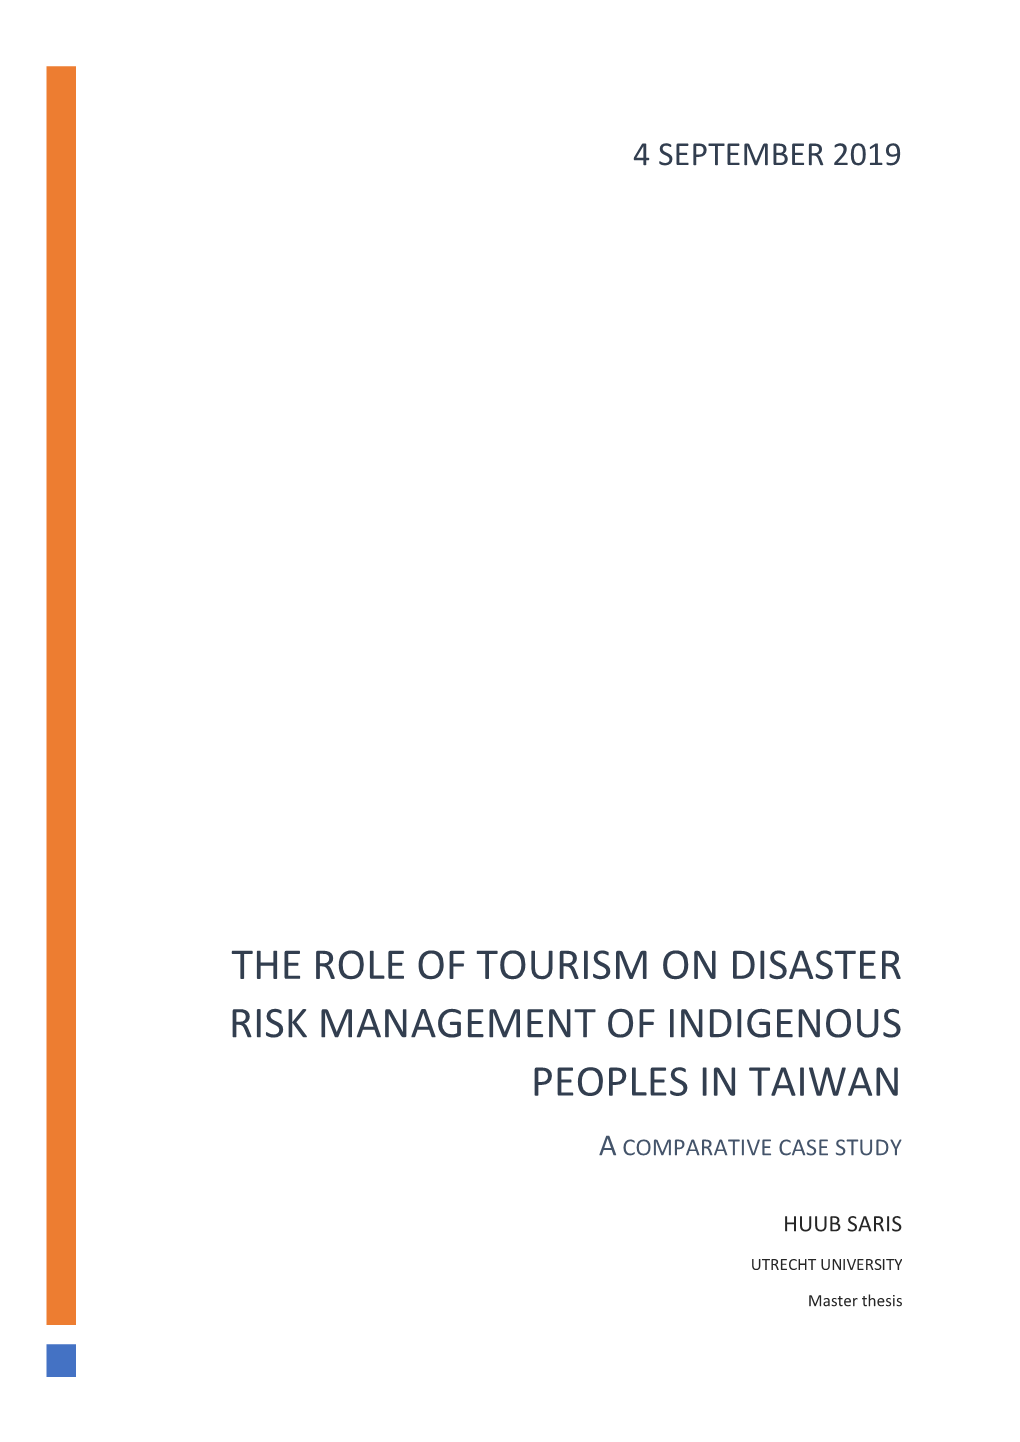 The Role of Tourism on Disaster Risk Management of Indigenous Peoples in Taiwan